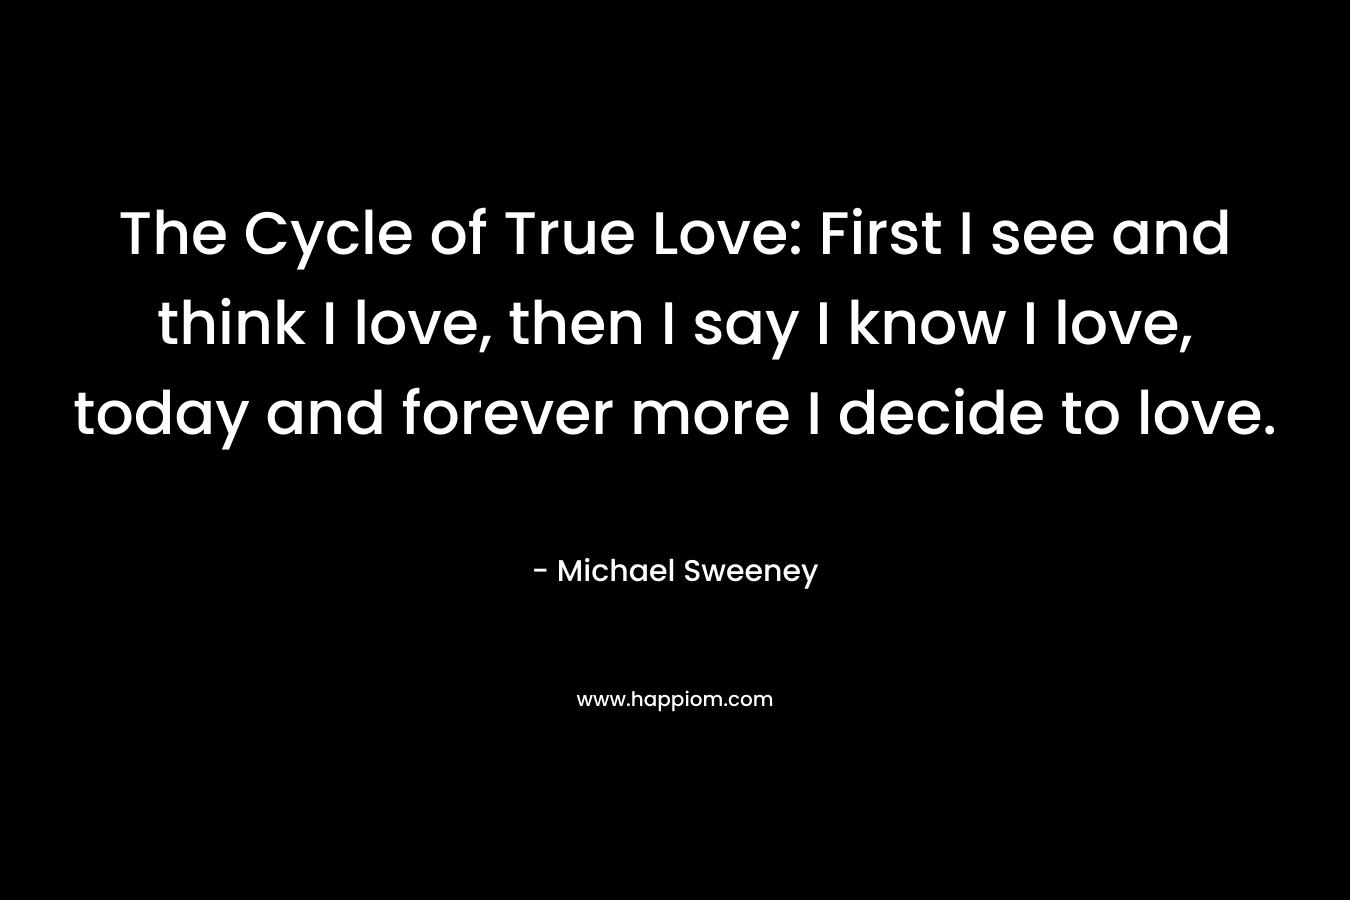 The Cycle of True Love: First I see and think I love, then I say I know I love, today and forever more I decide to love.